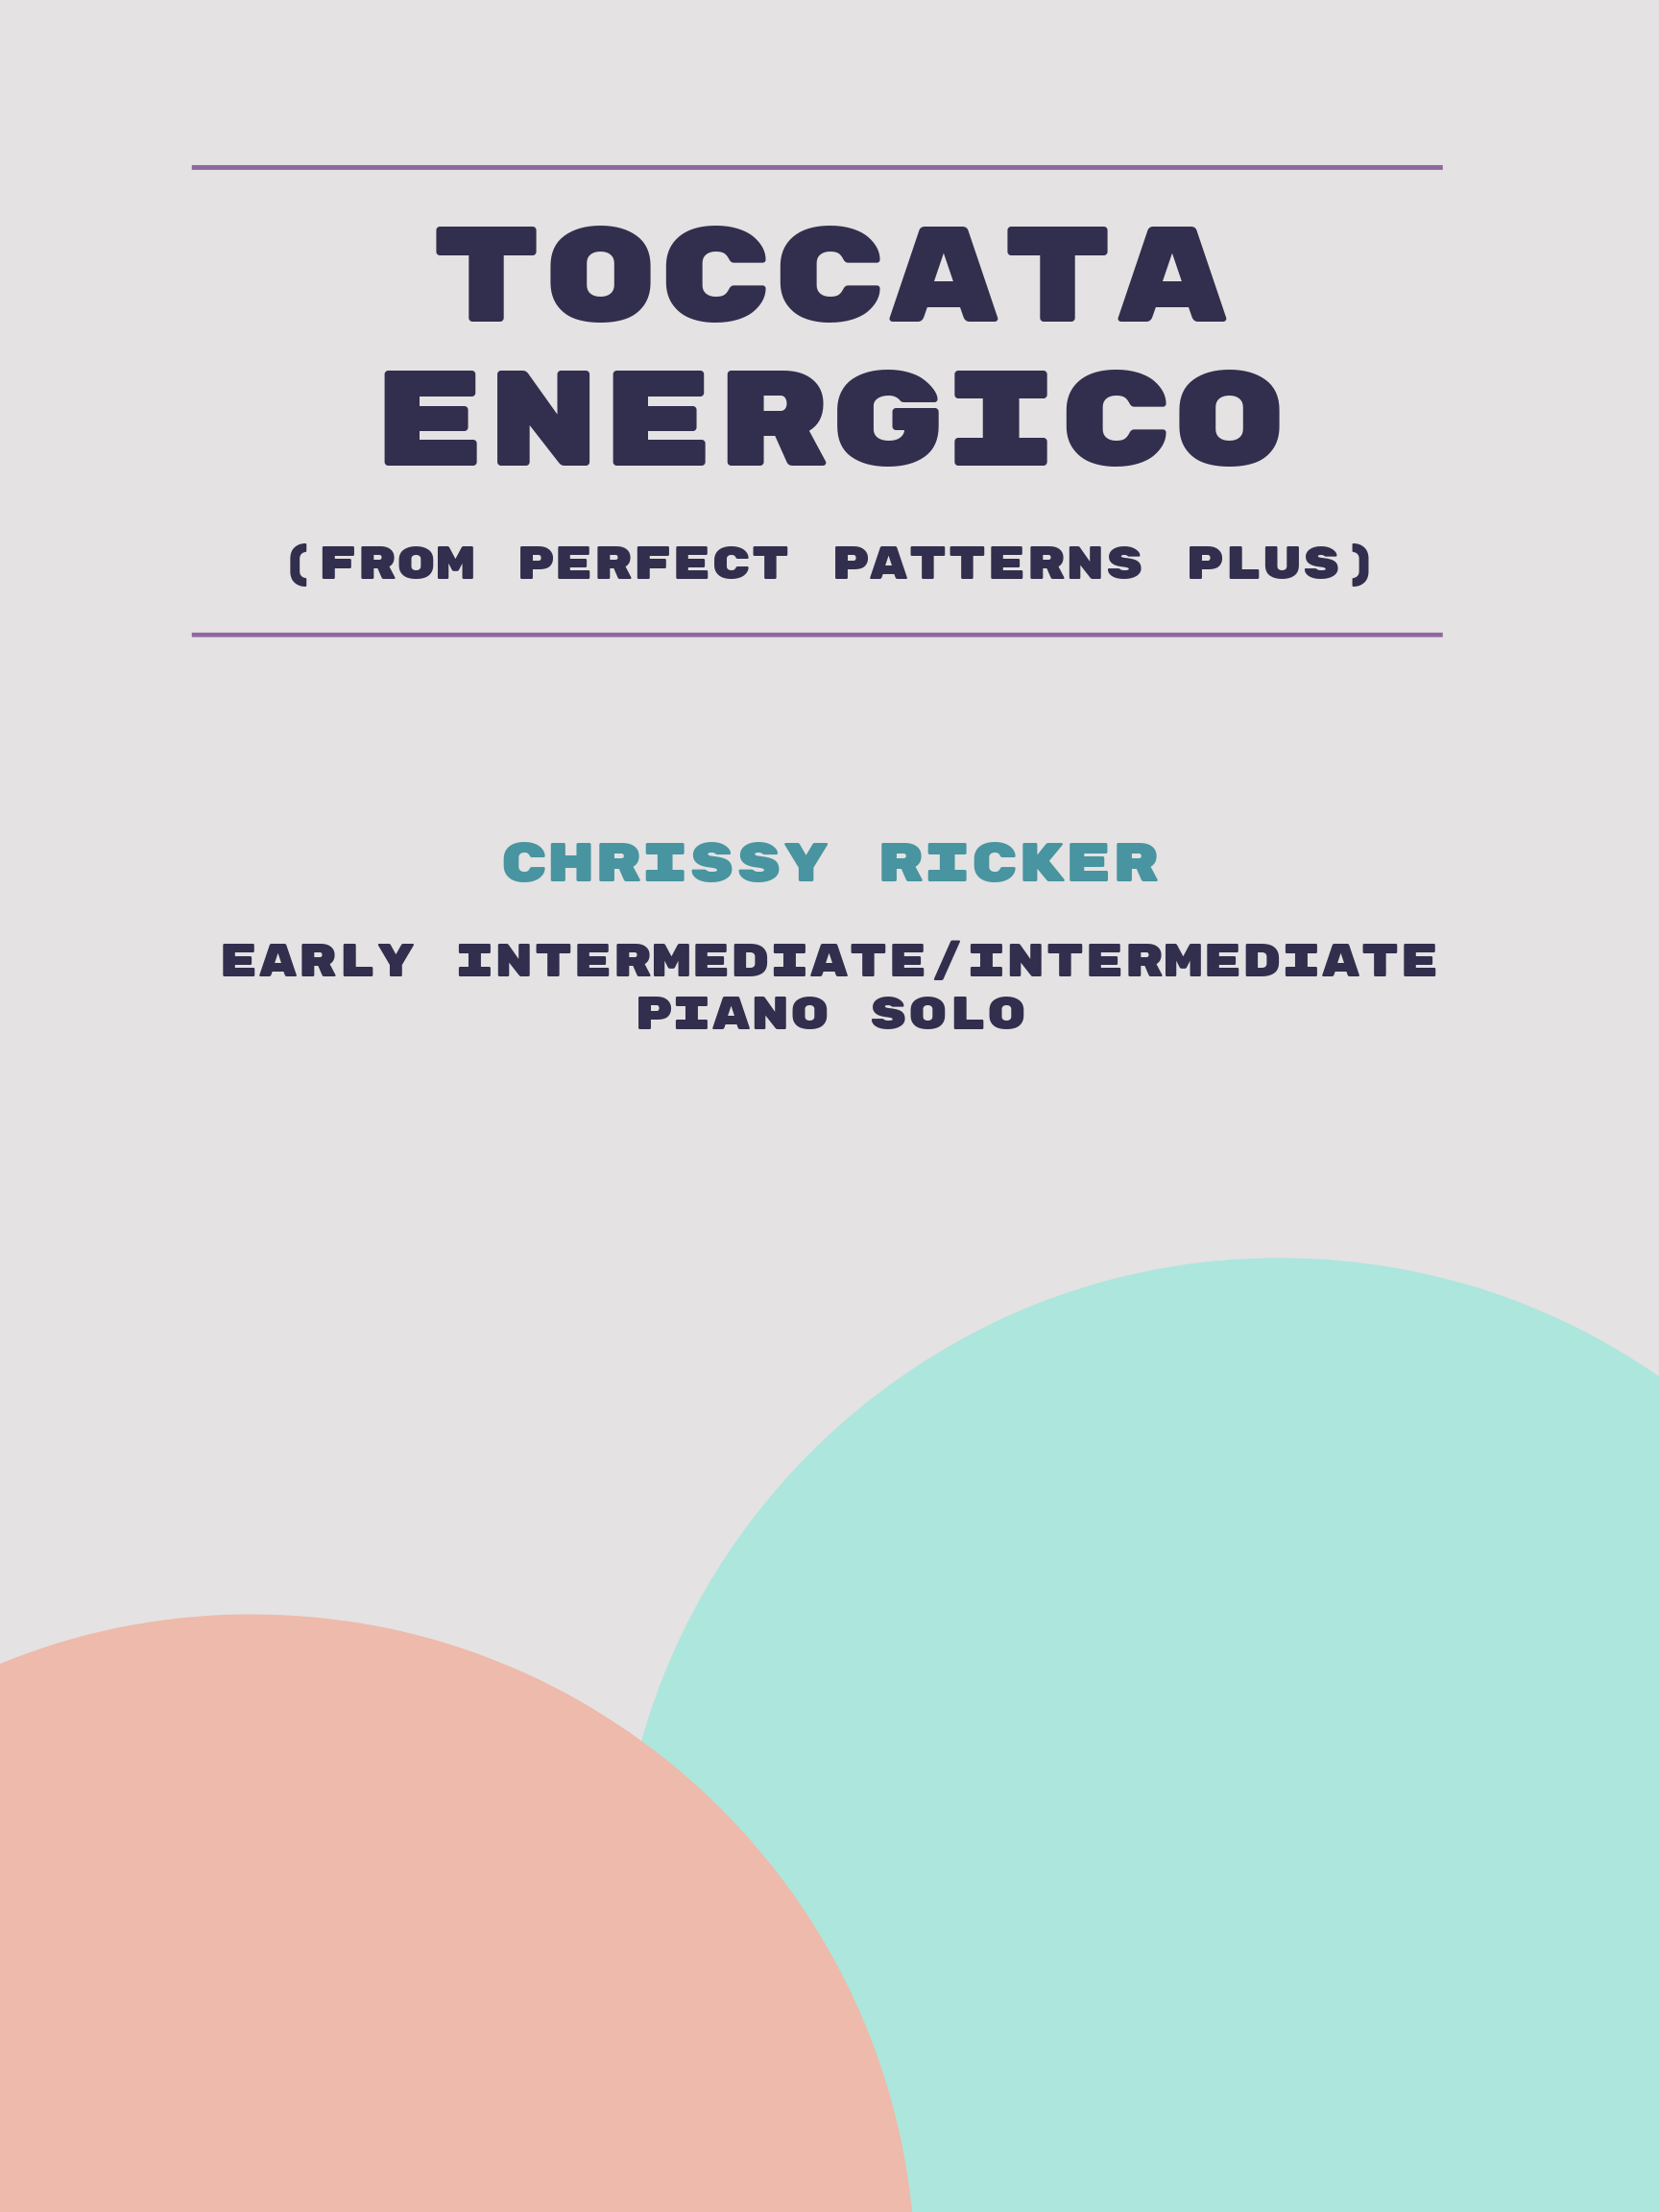 Toccata Energico by Chrissy Ricker